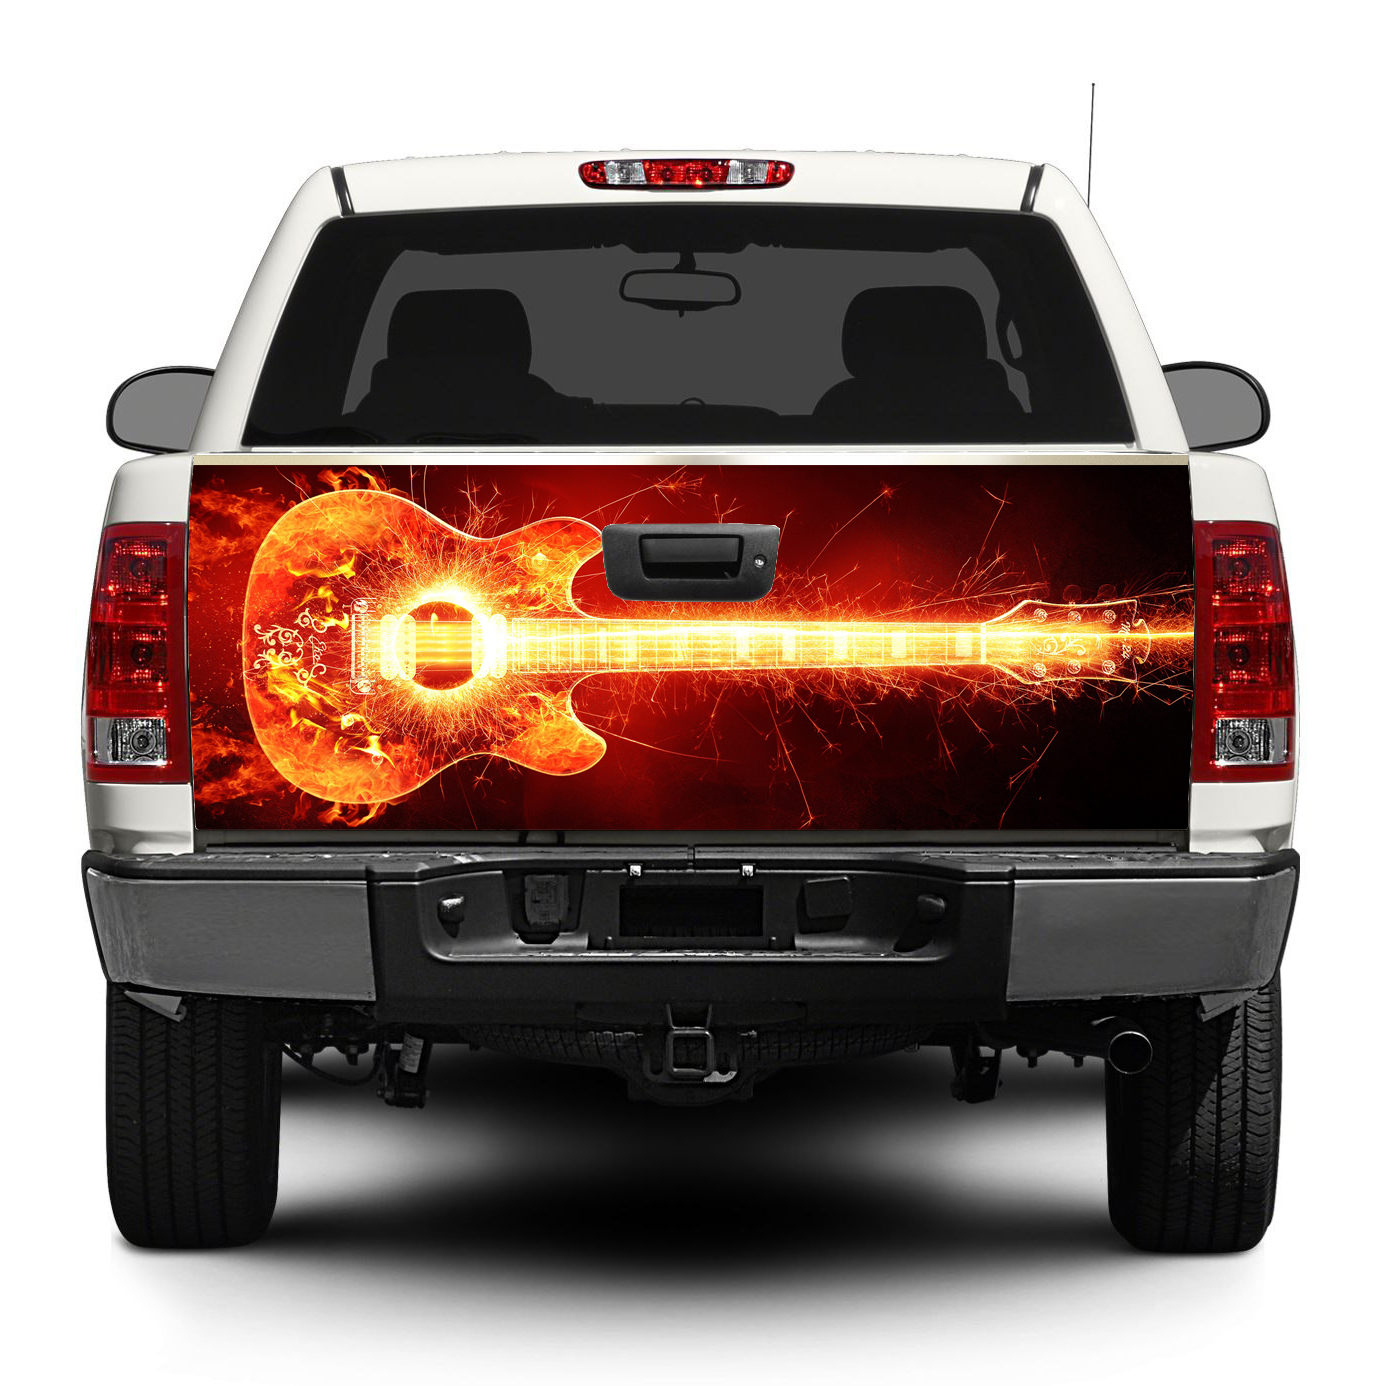 Guitar Buring Rock Music Tailgate Decal Decal Sticker Wrap Truck SUV Car